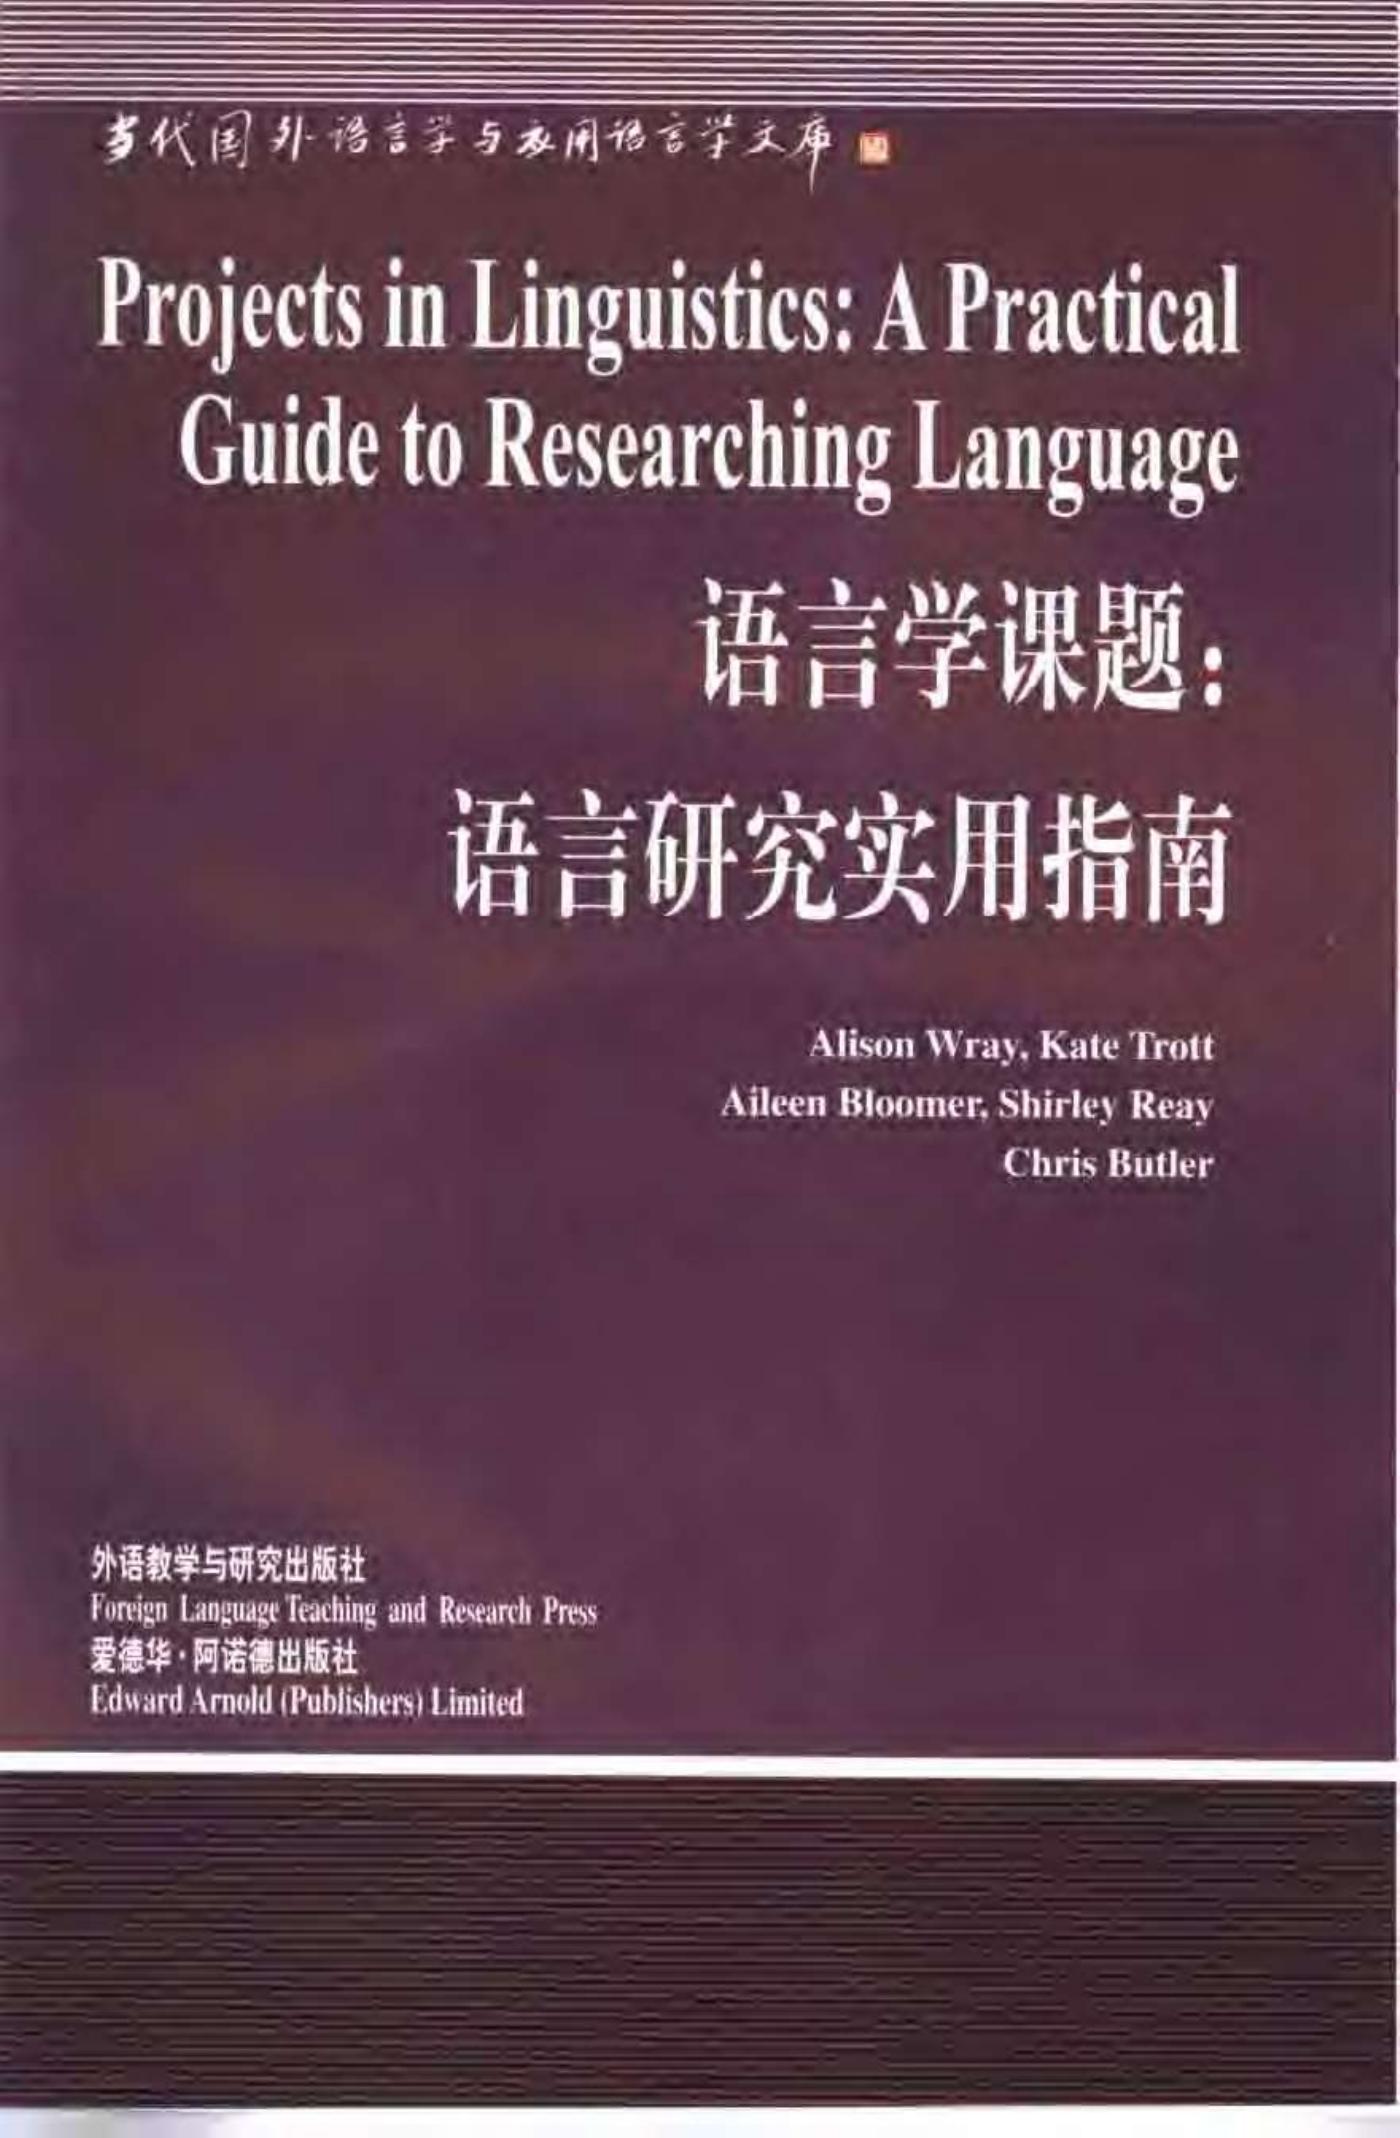 Projects in Linguistics - A Practial Guide to Researching Language